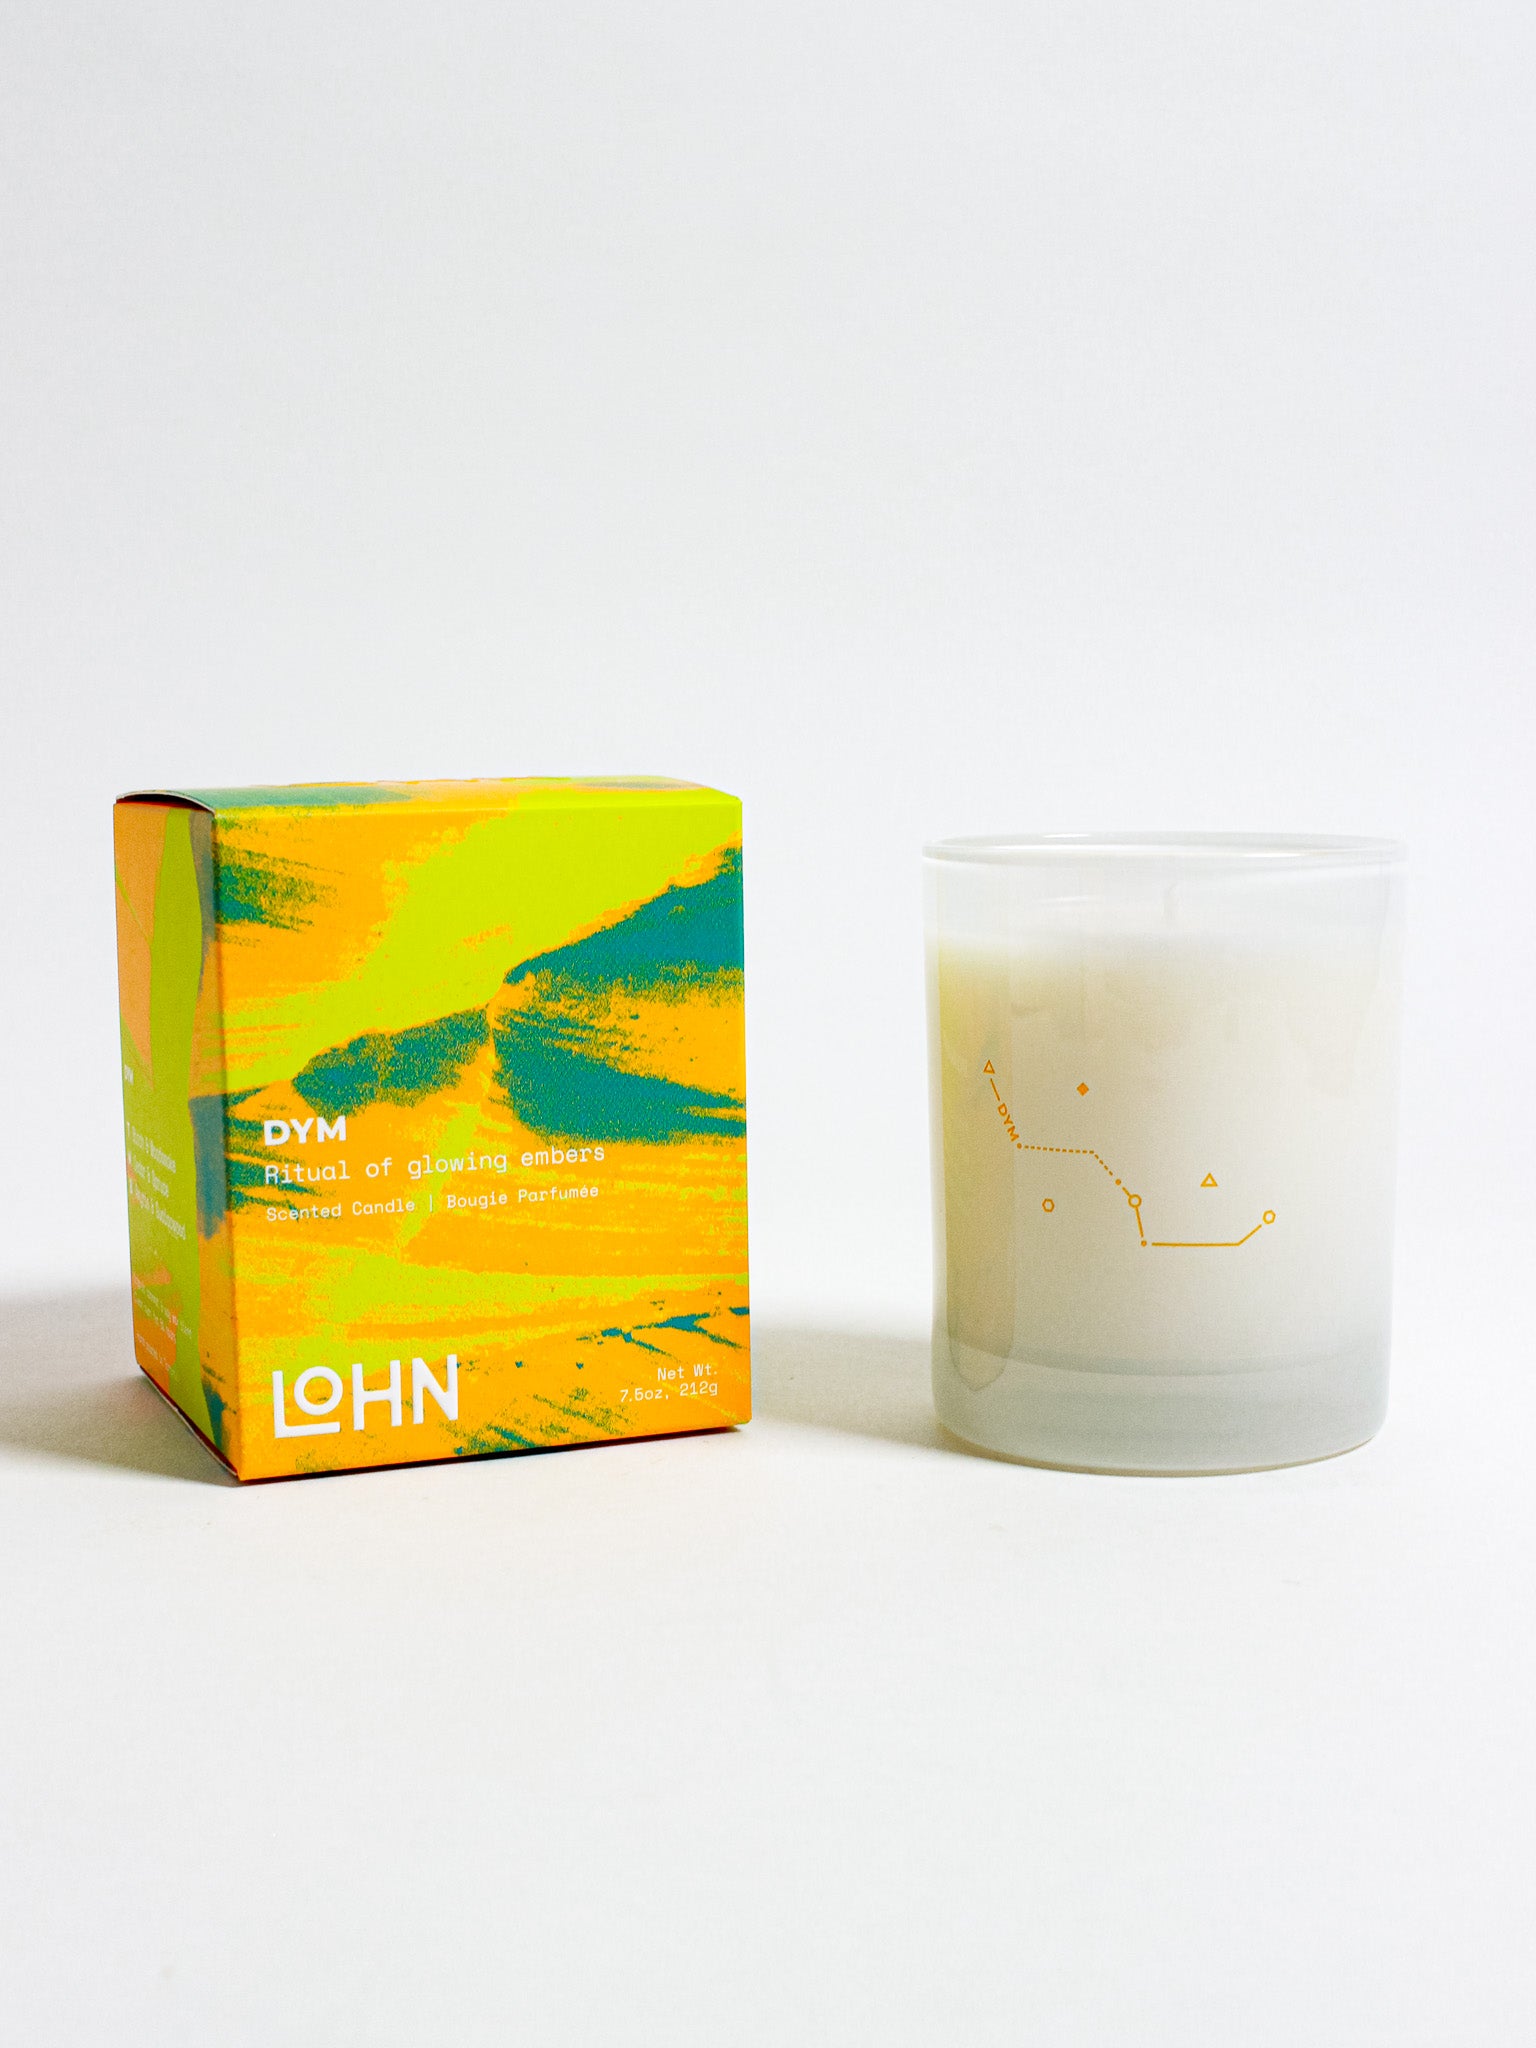 Fresh Pine 7.5oz Soy Wax Blend Candle by Scented Vessel